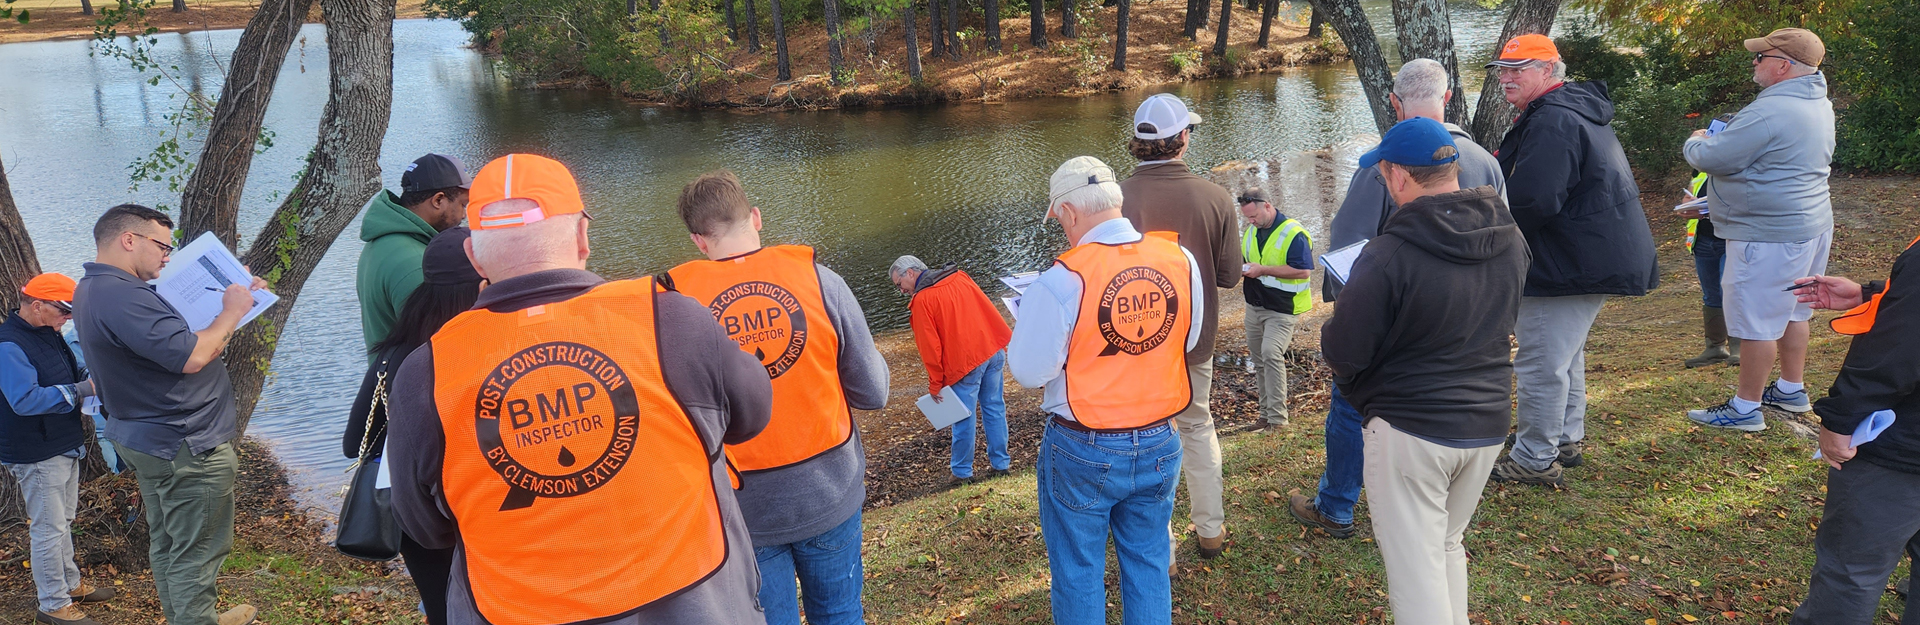 post bmp inspector course participants holding clipboards and looking toward a creek